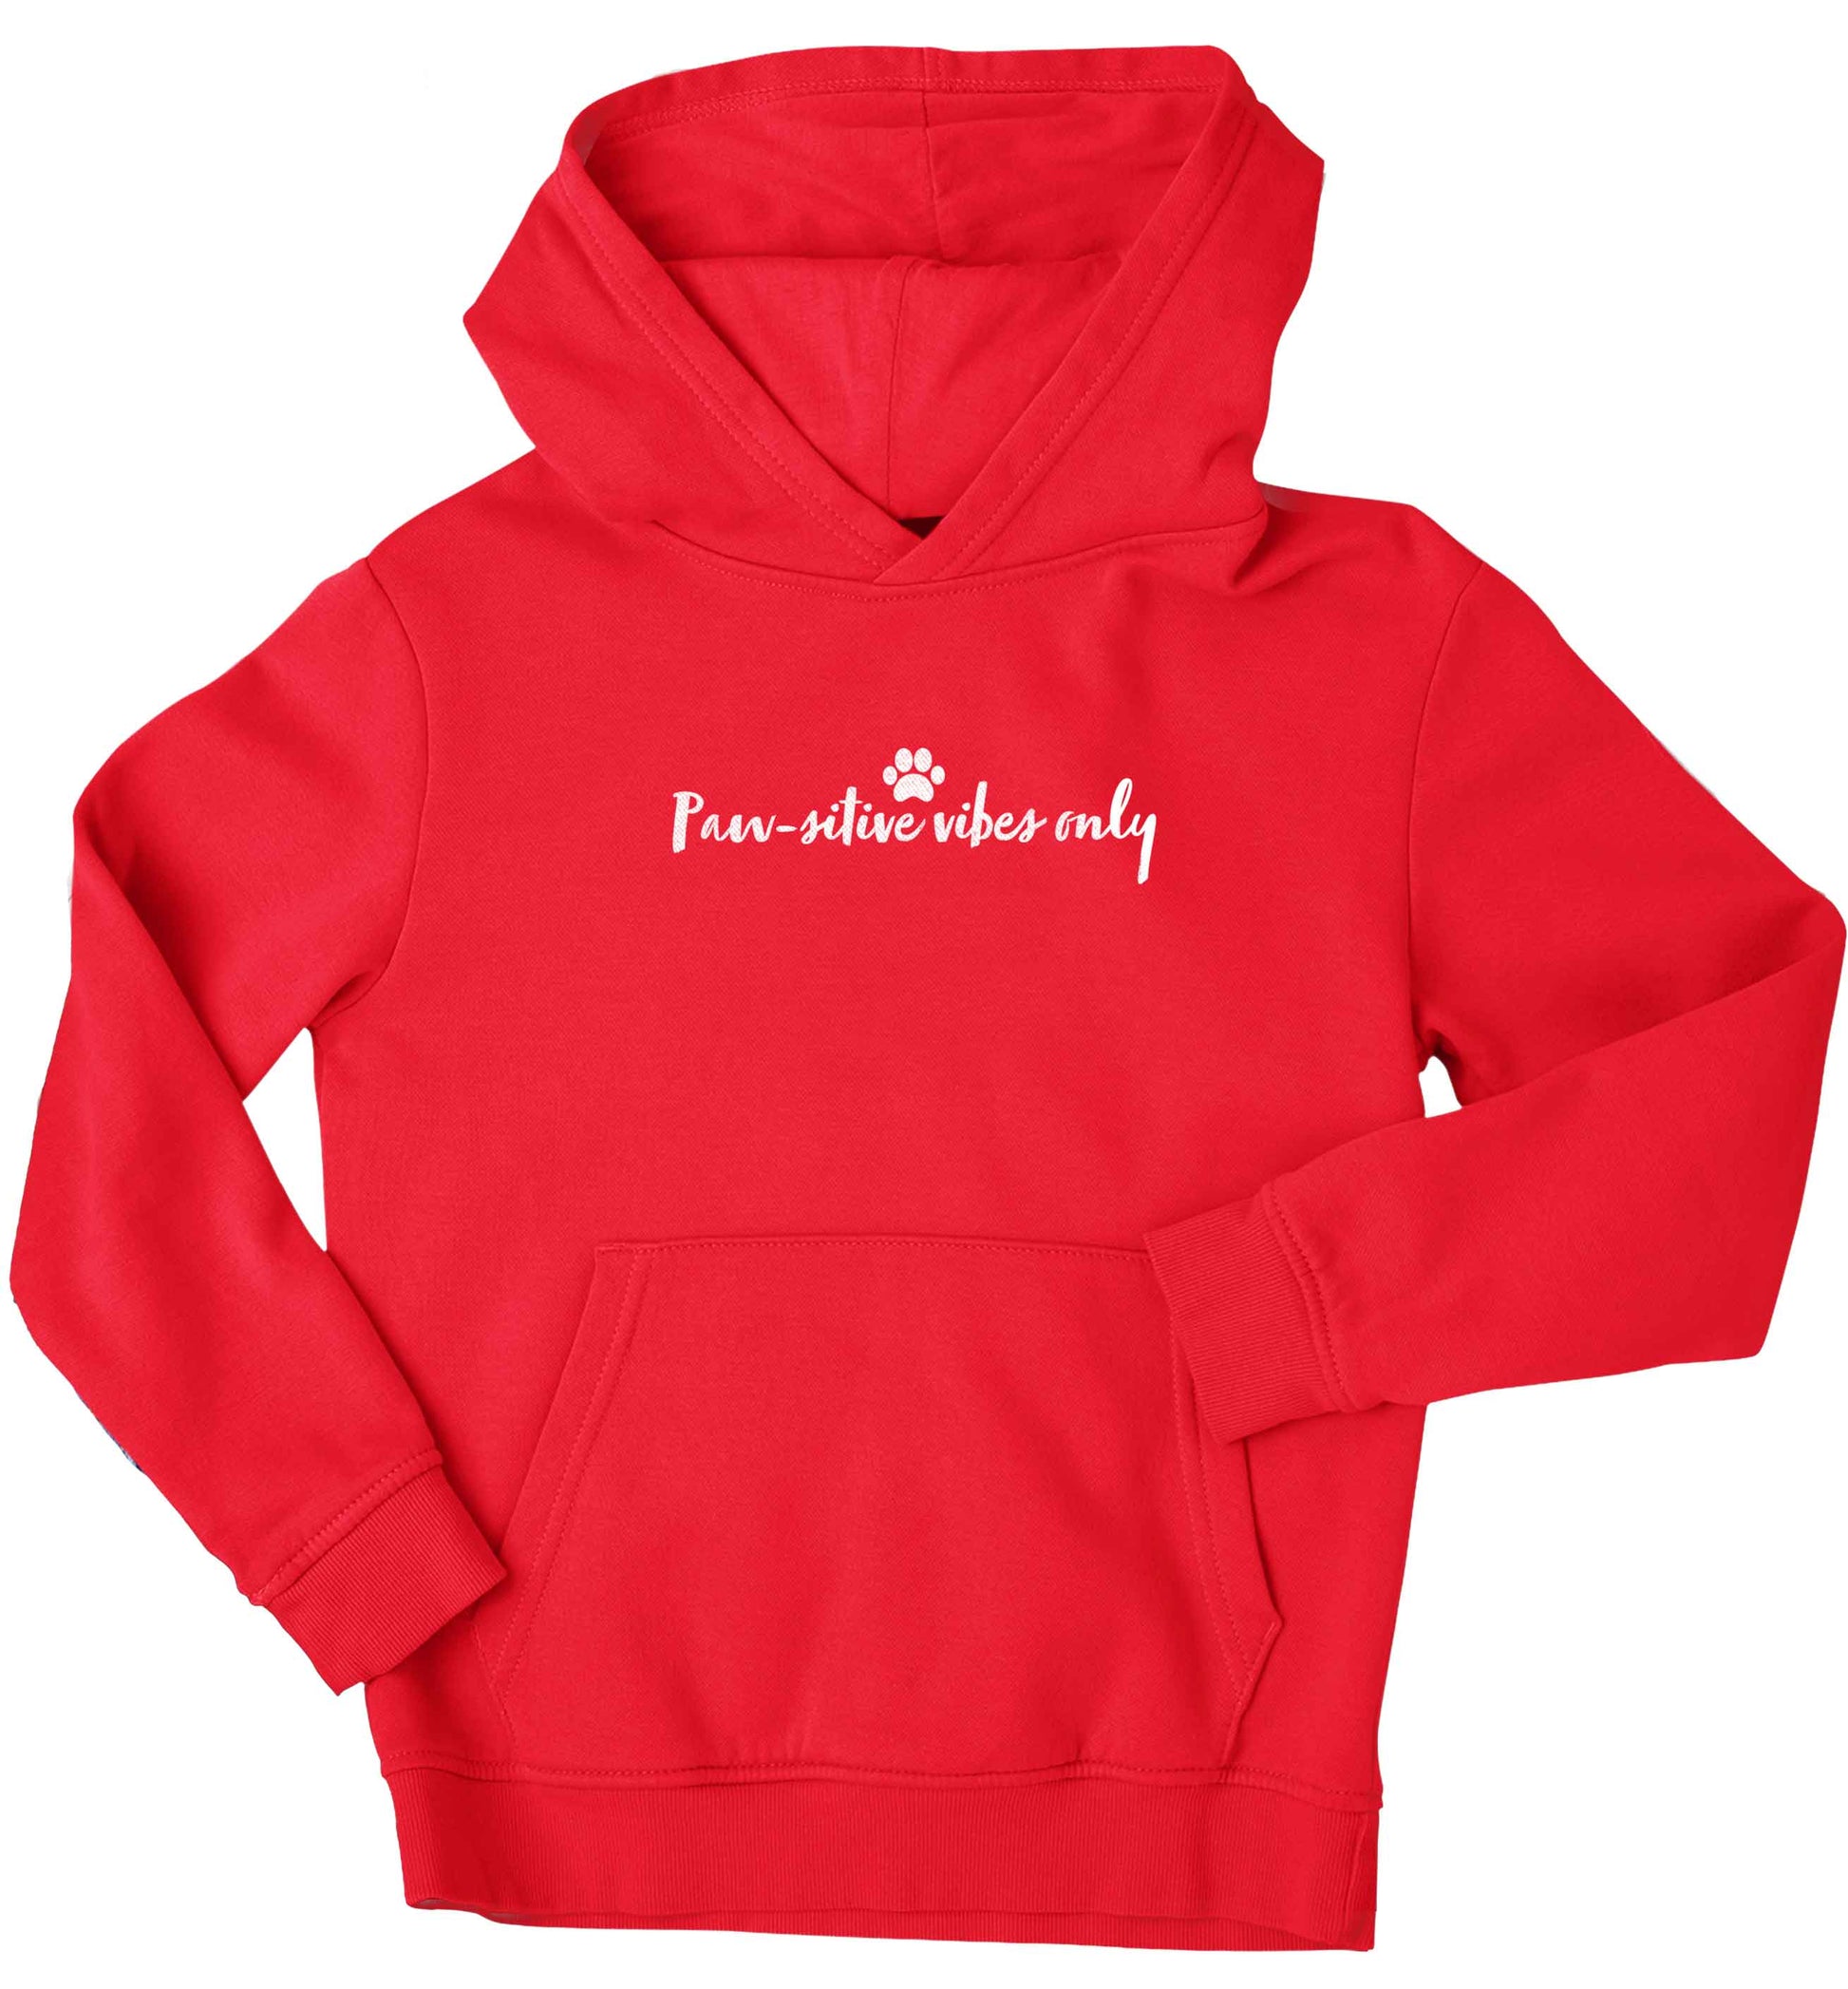 Pawsitive vibes only Kit children's red hoodie 12-13 Years